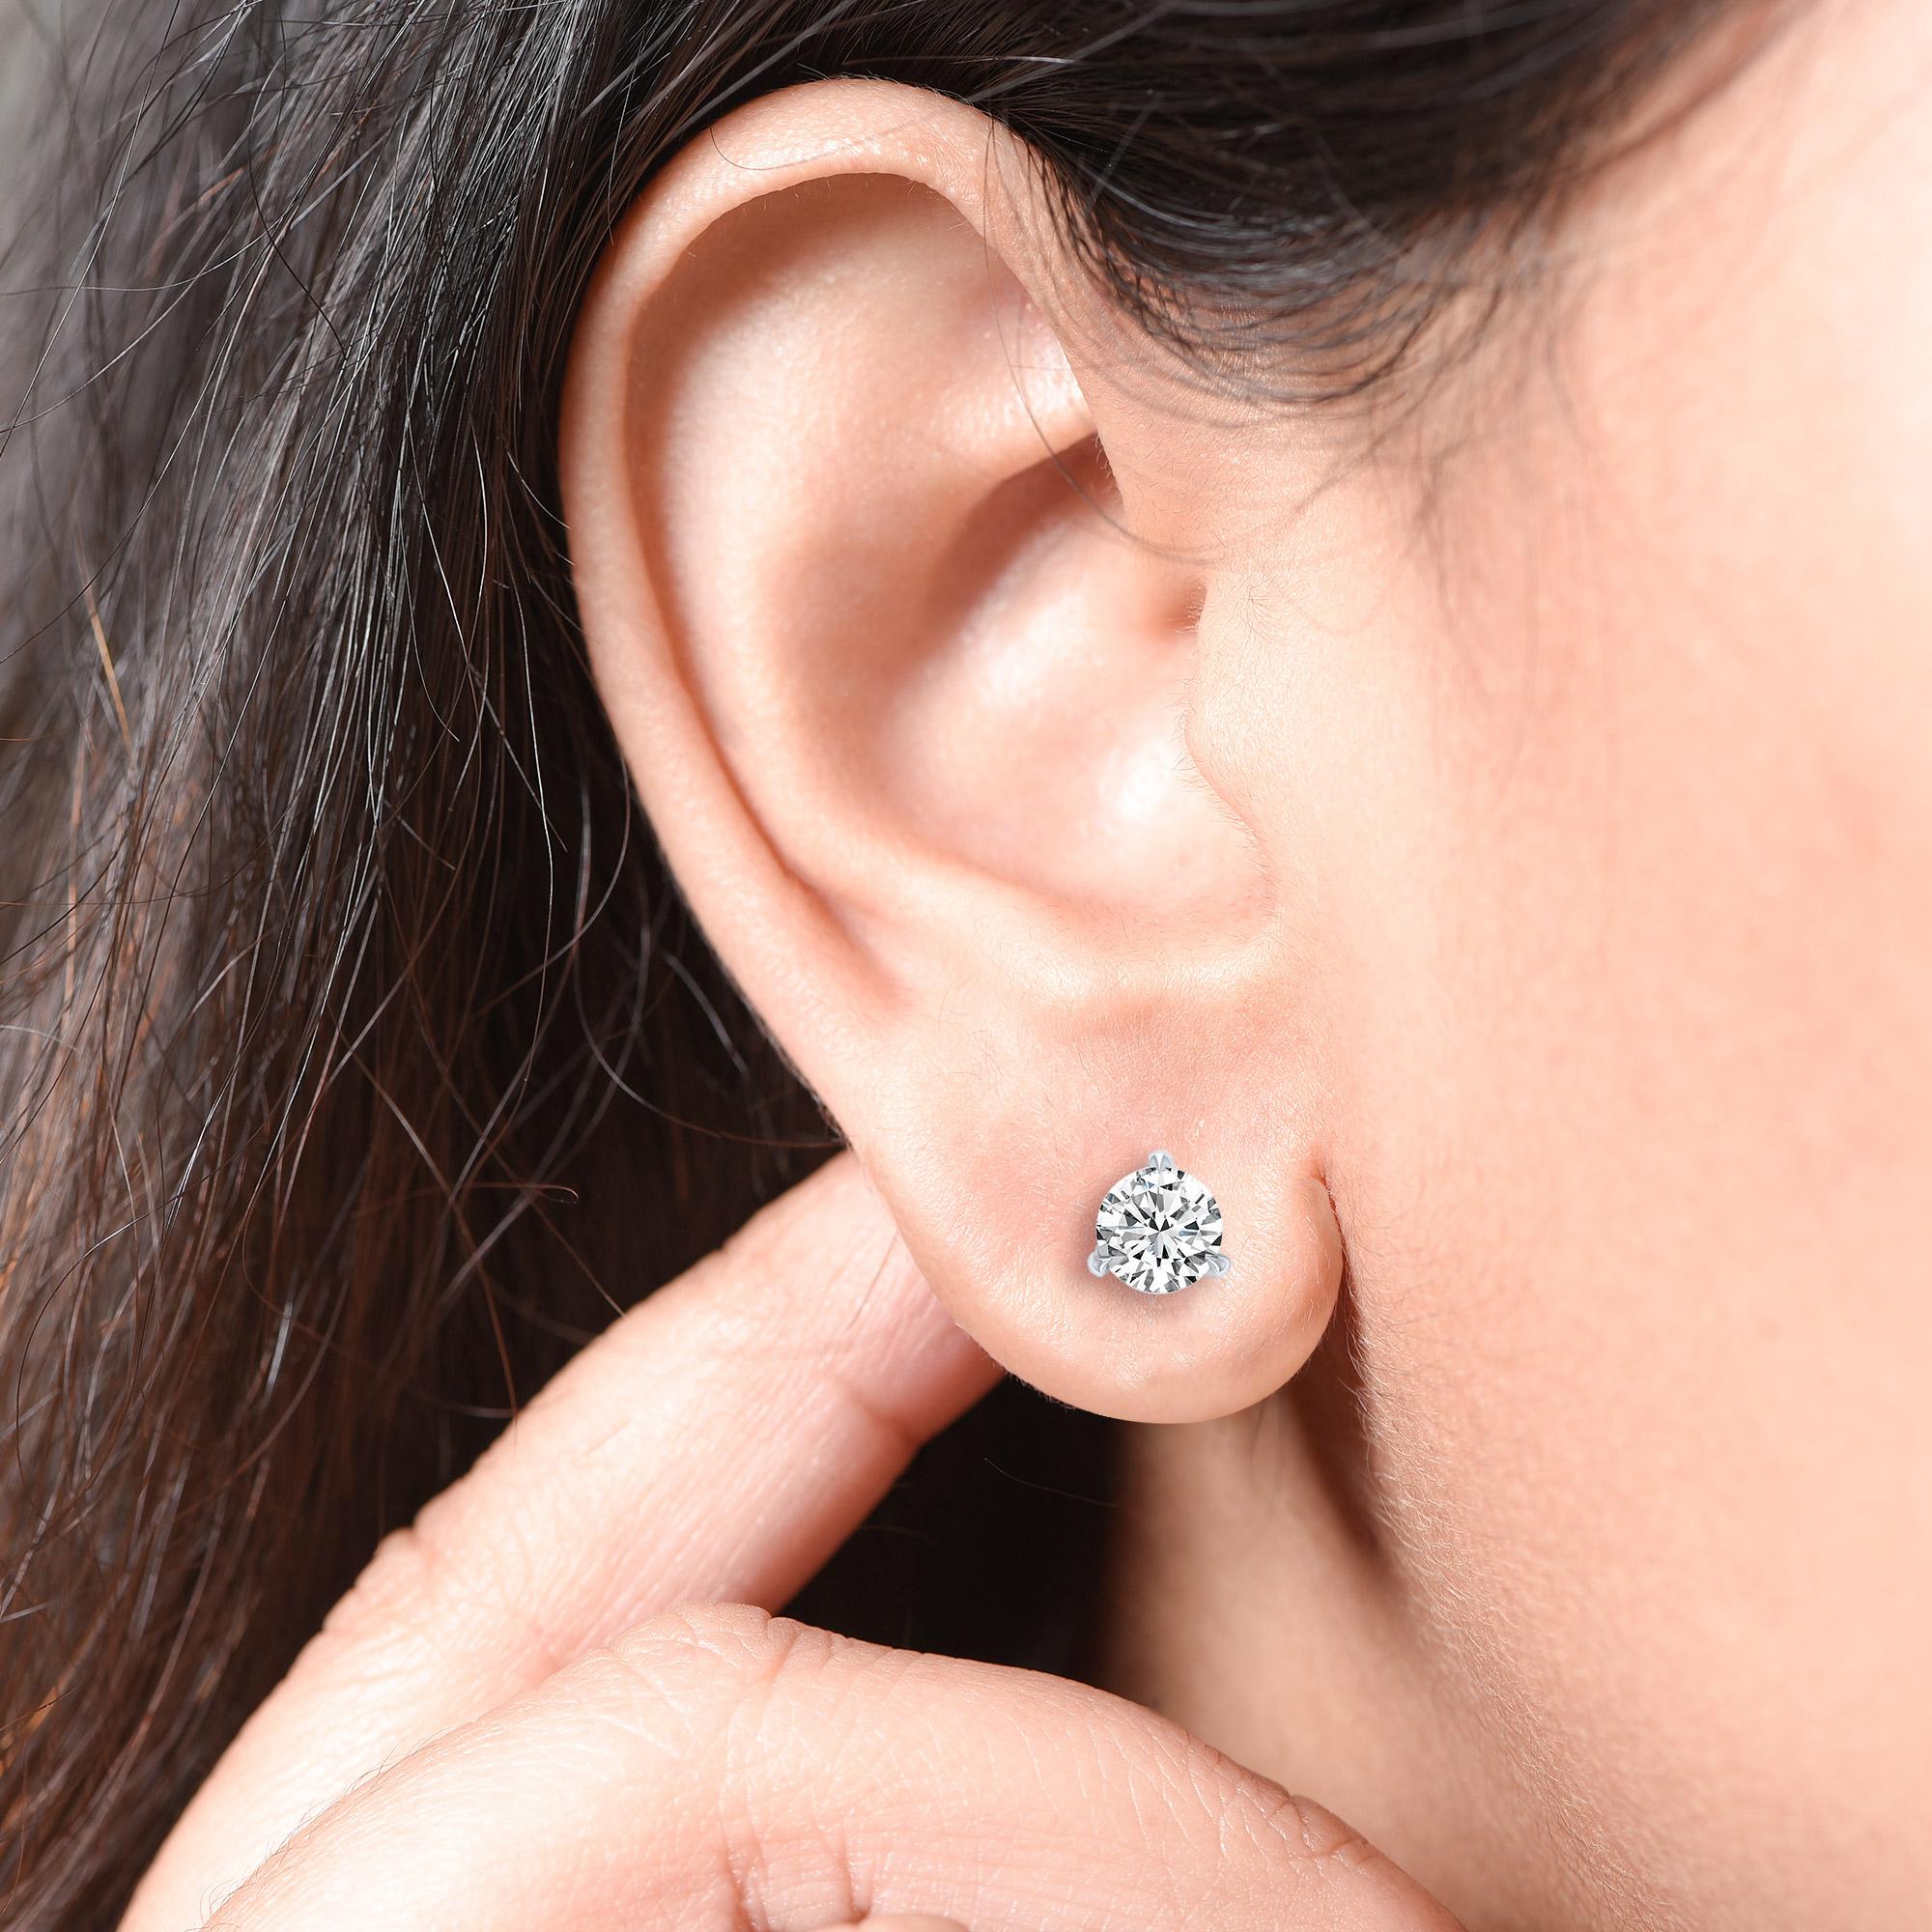 These GIA certified classic diamond studs showcase a pair of perfectly matched diamonds weighing total 1.25 carat. Crafted in 18-karat white gold, these three prong earrings are available in yellow and rose gold as well.

Perfect for gifting and for